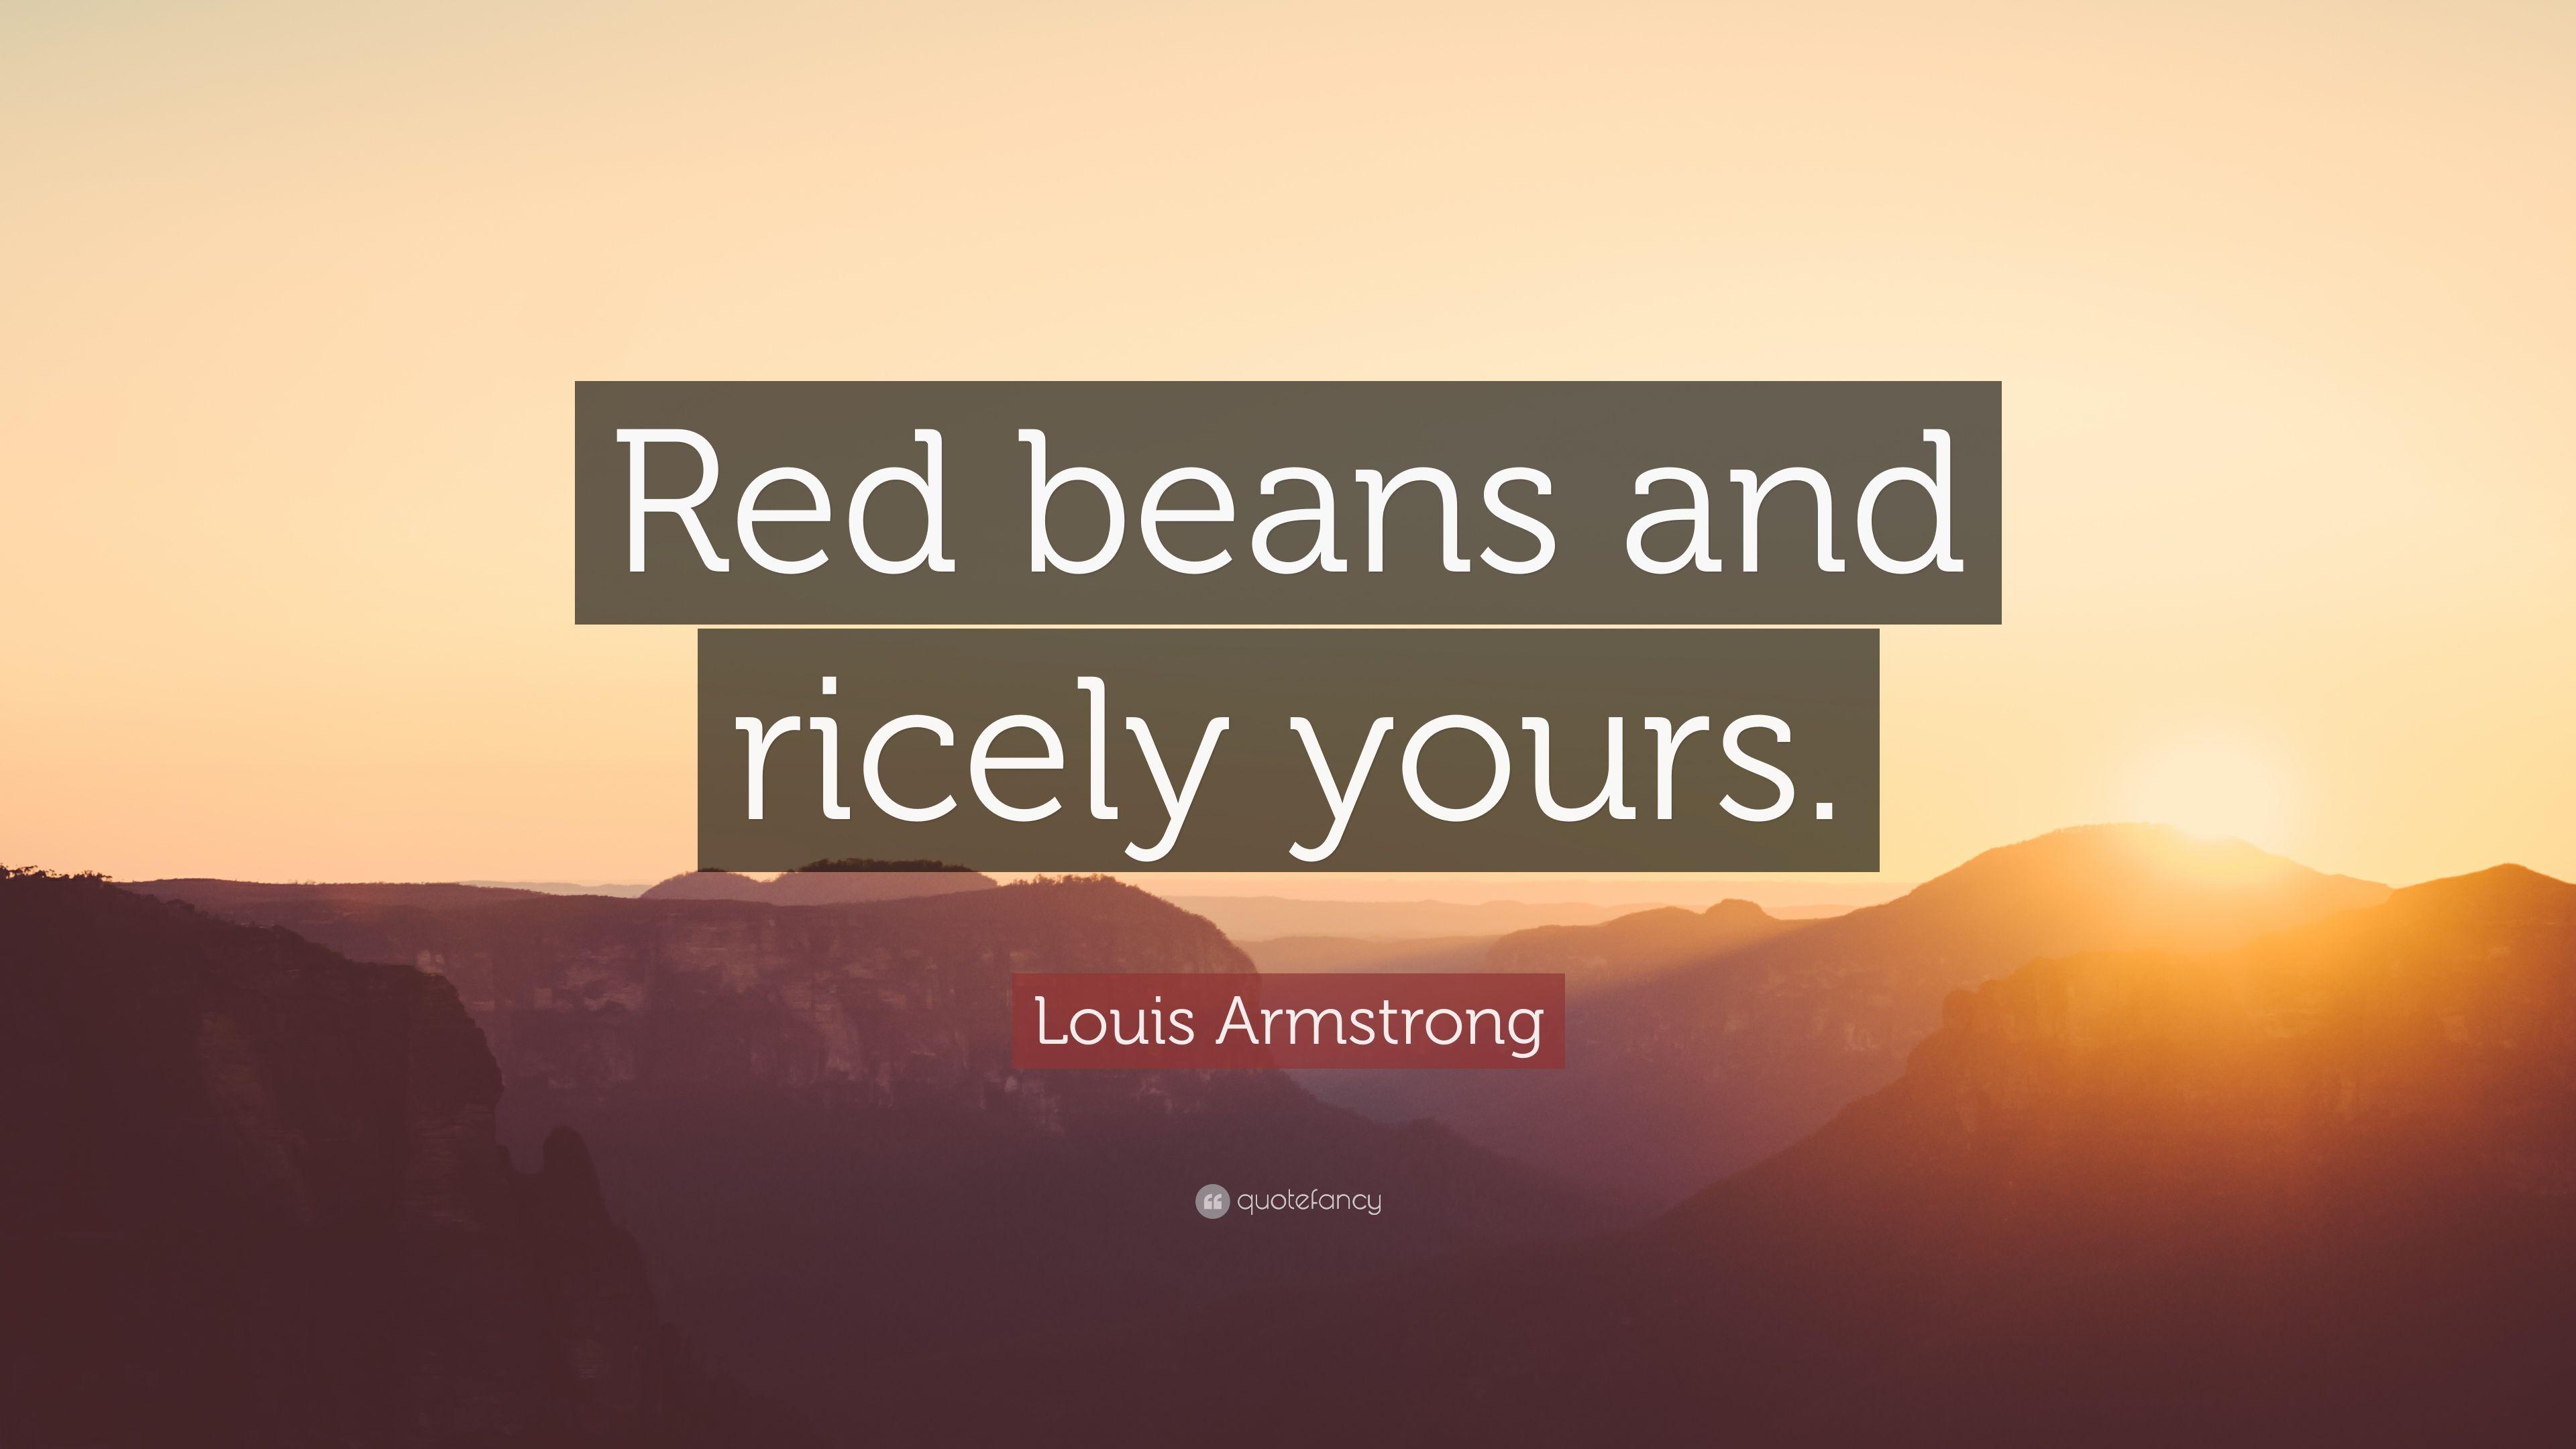 Louis Armstrong Quote: “Red beans and ricely yours.” 7 wallpaper